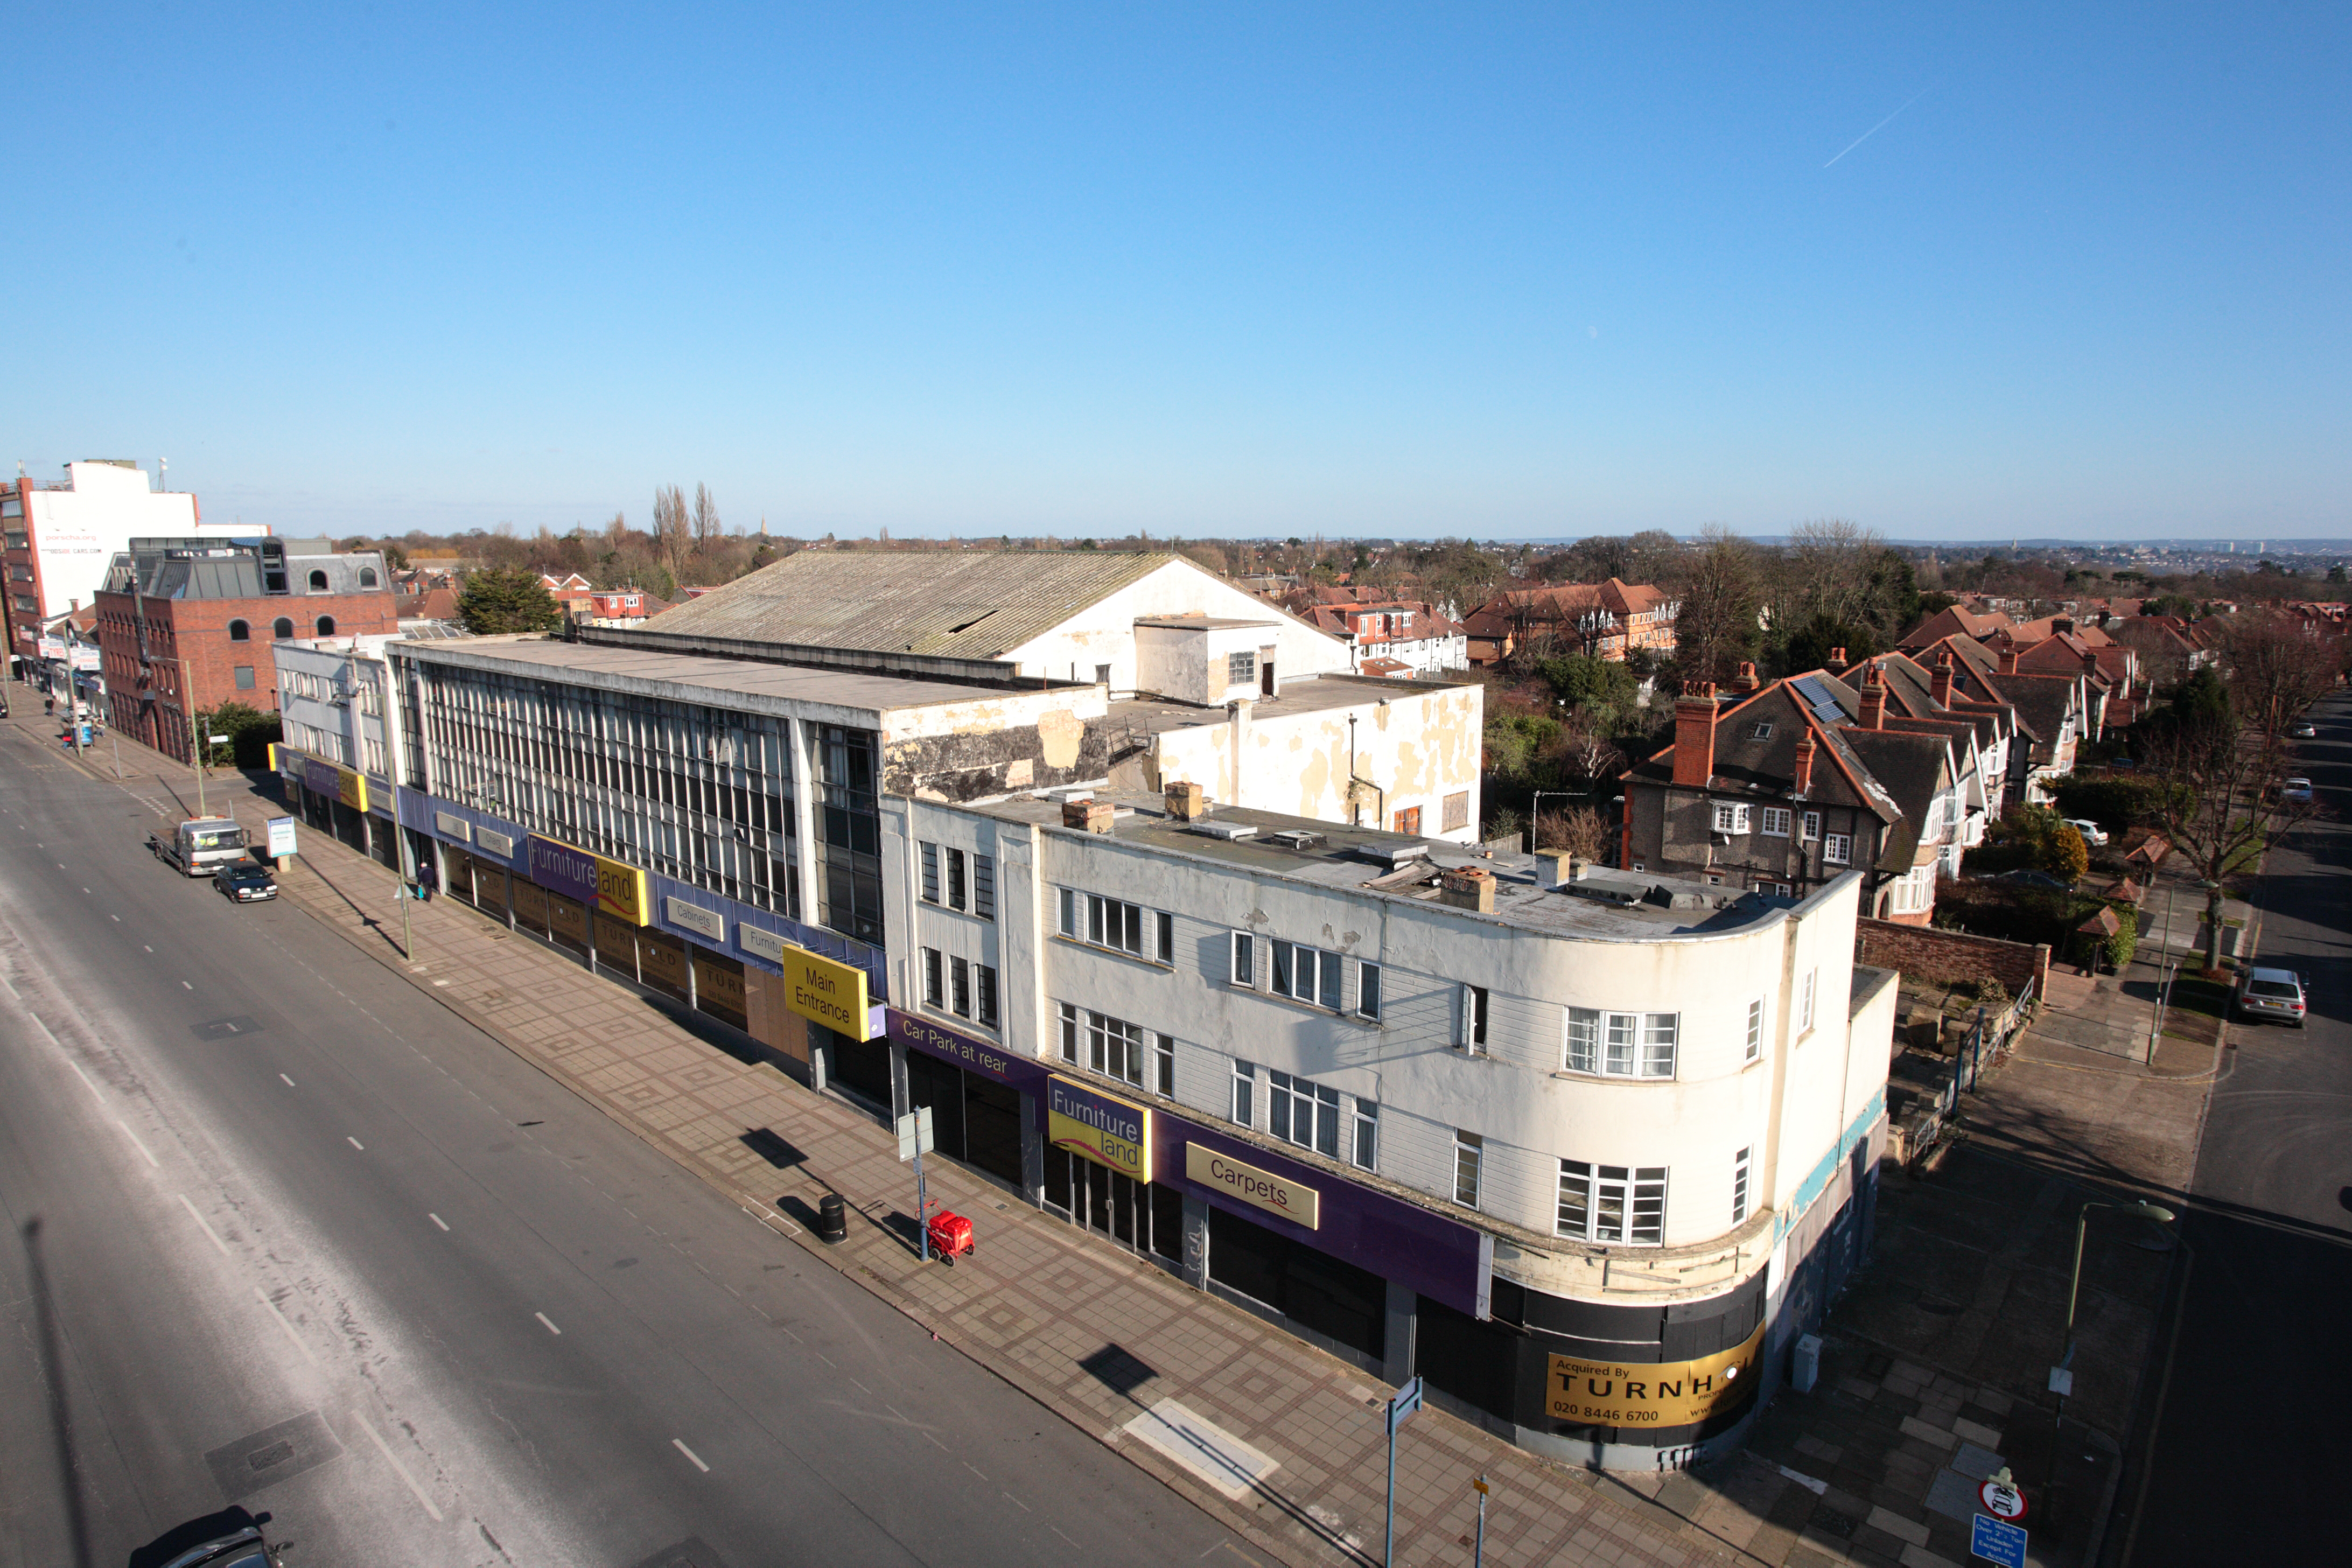 Vacant 60,000 sq ft commercial building. Planning obtained for 60 residential units and 5,000 sq ft of B1 space. High Road, N12, London Borough of Barnet.